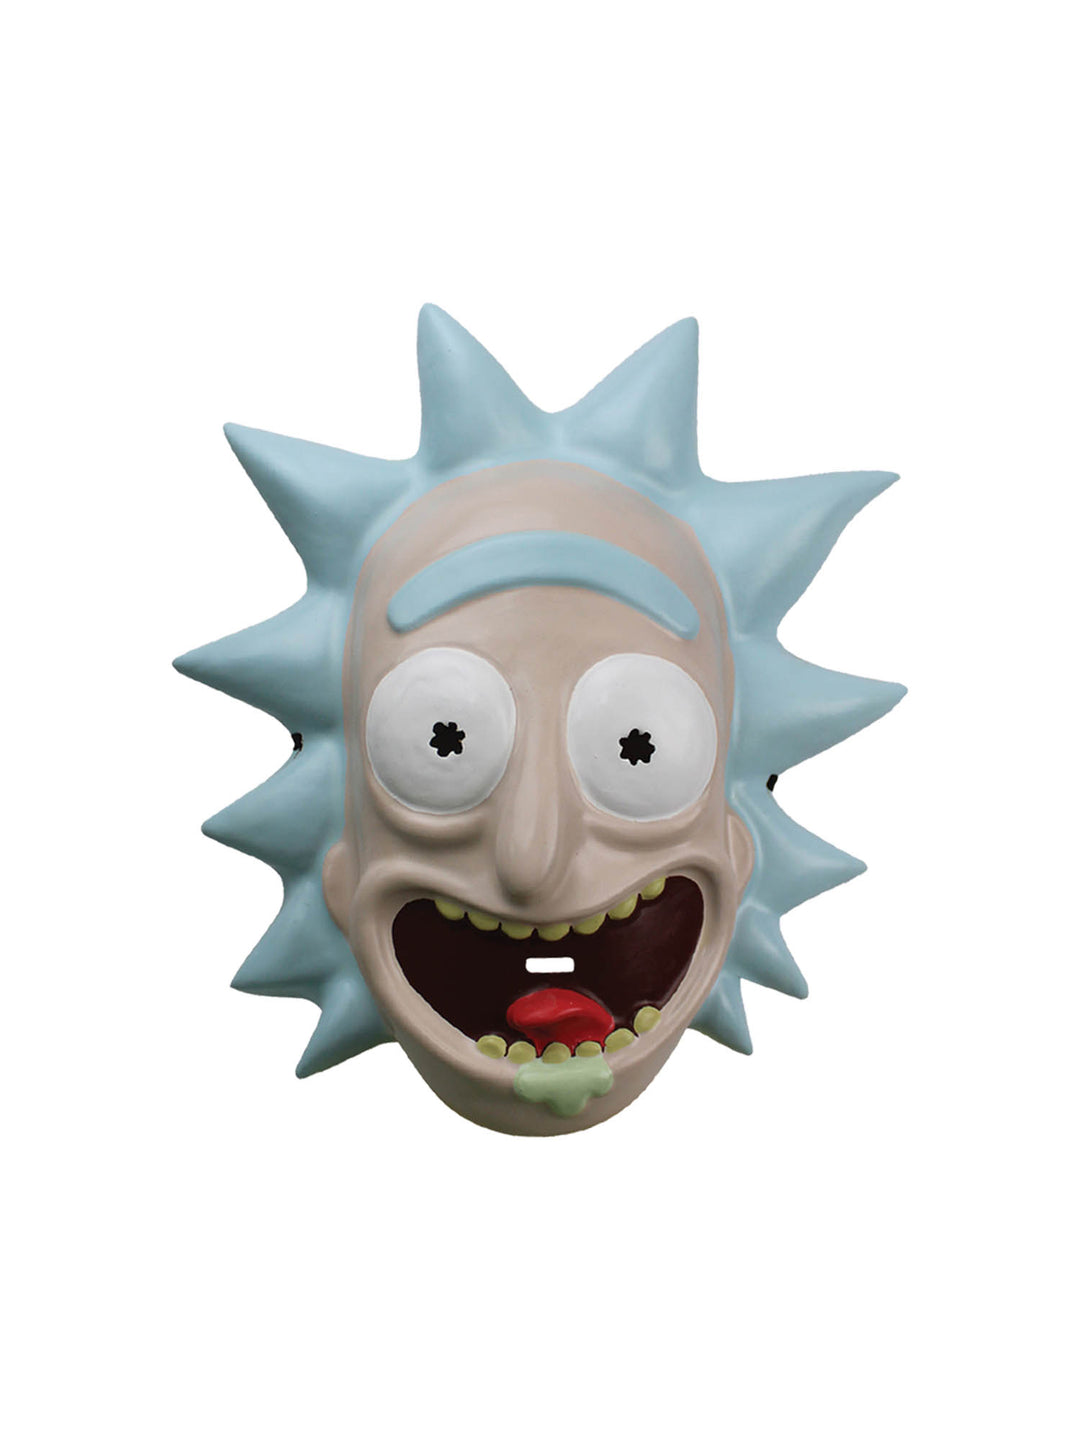 Rick Vacuform Mask from Rick and Morty TV Show